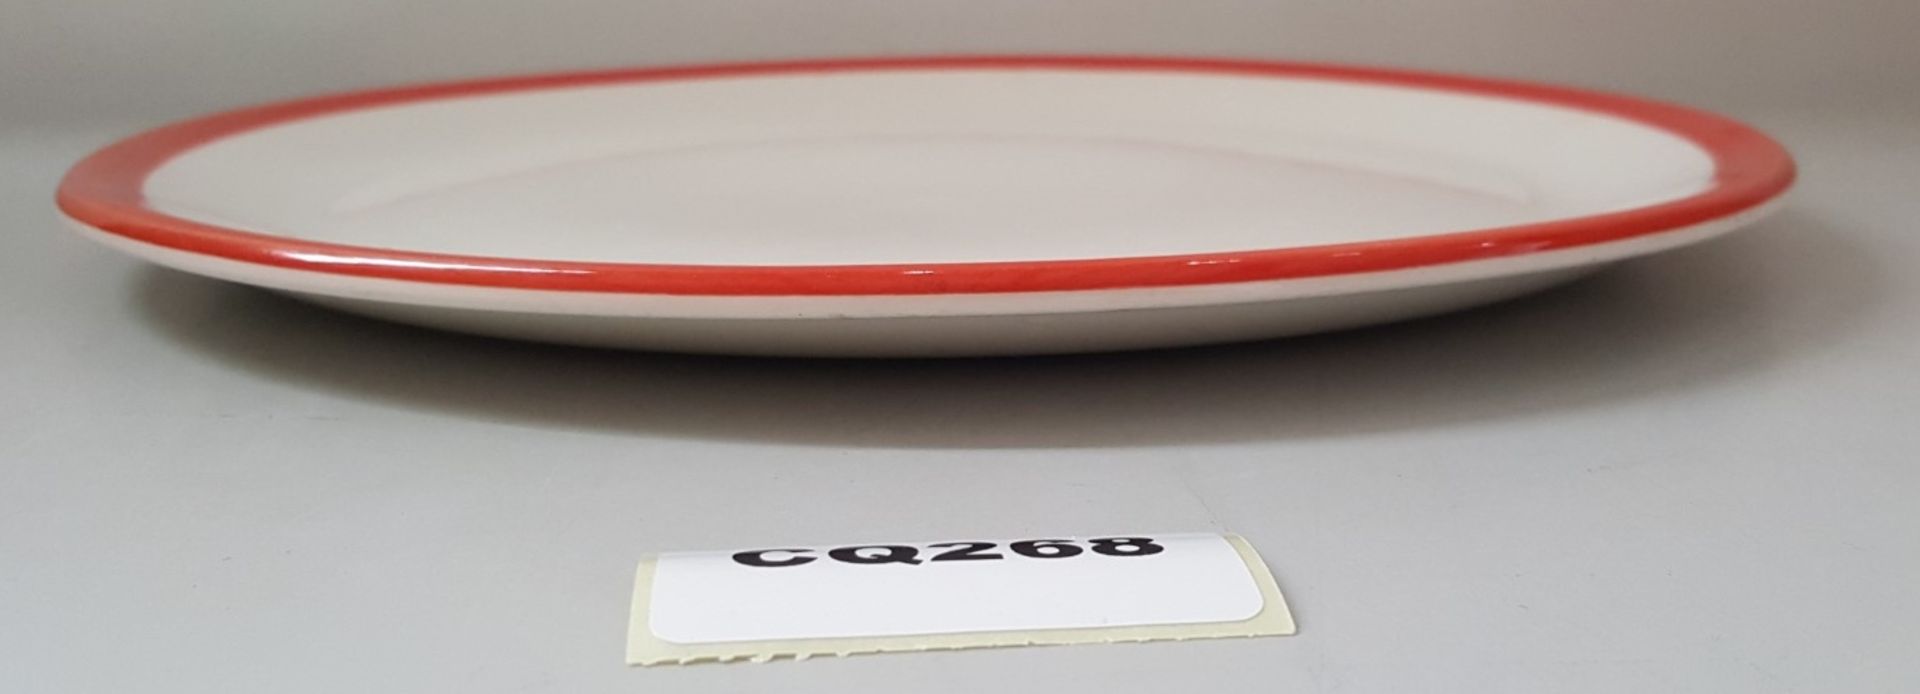 22 x Steelite Coupe Plates White With Red Outline Egde 27.5CM - Ref CQ268 - Image 3 of 4